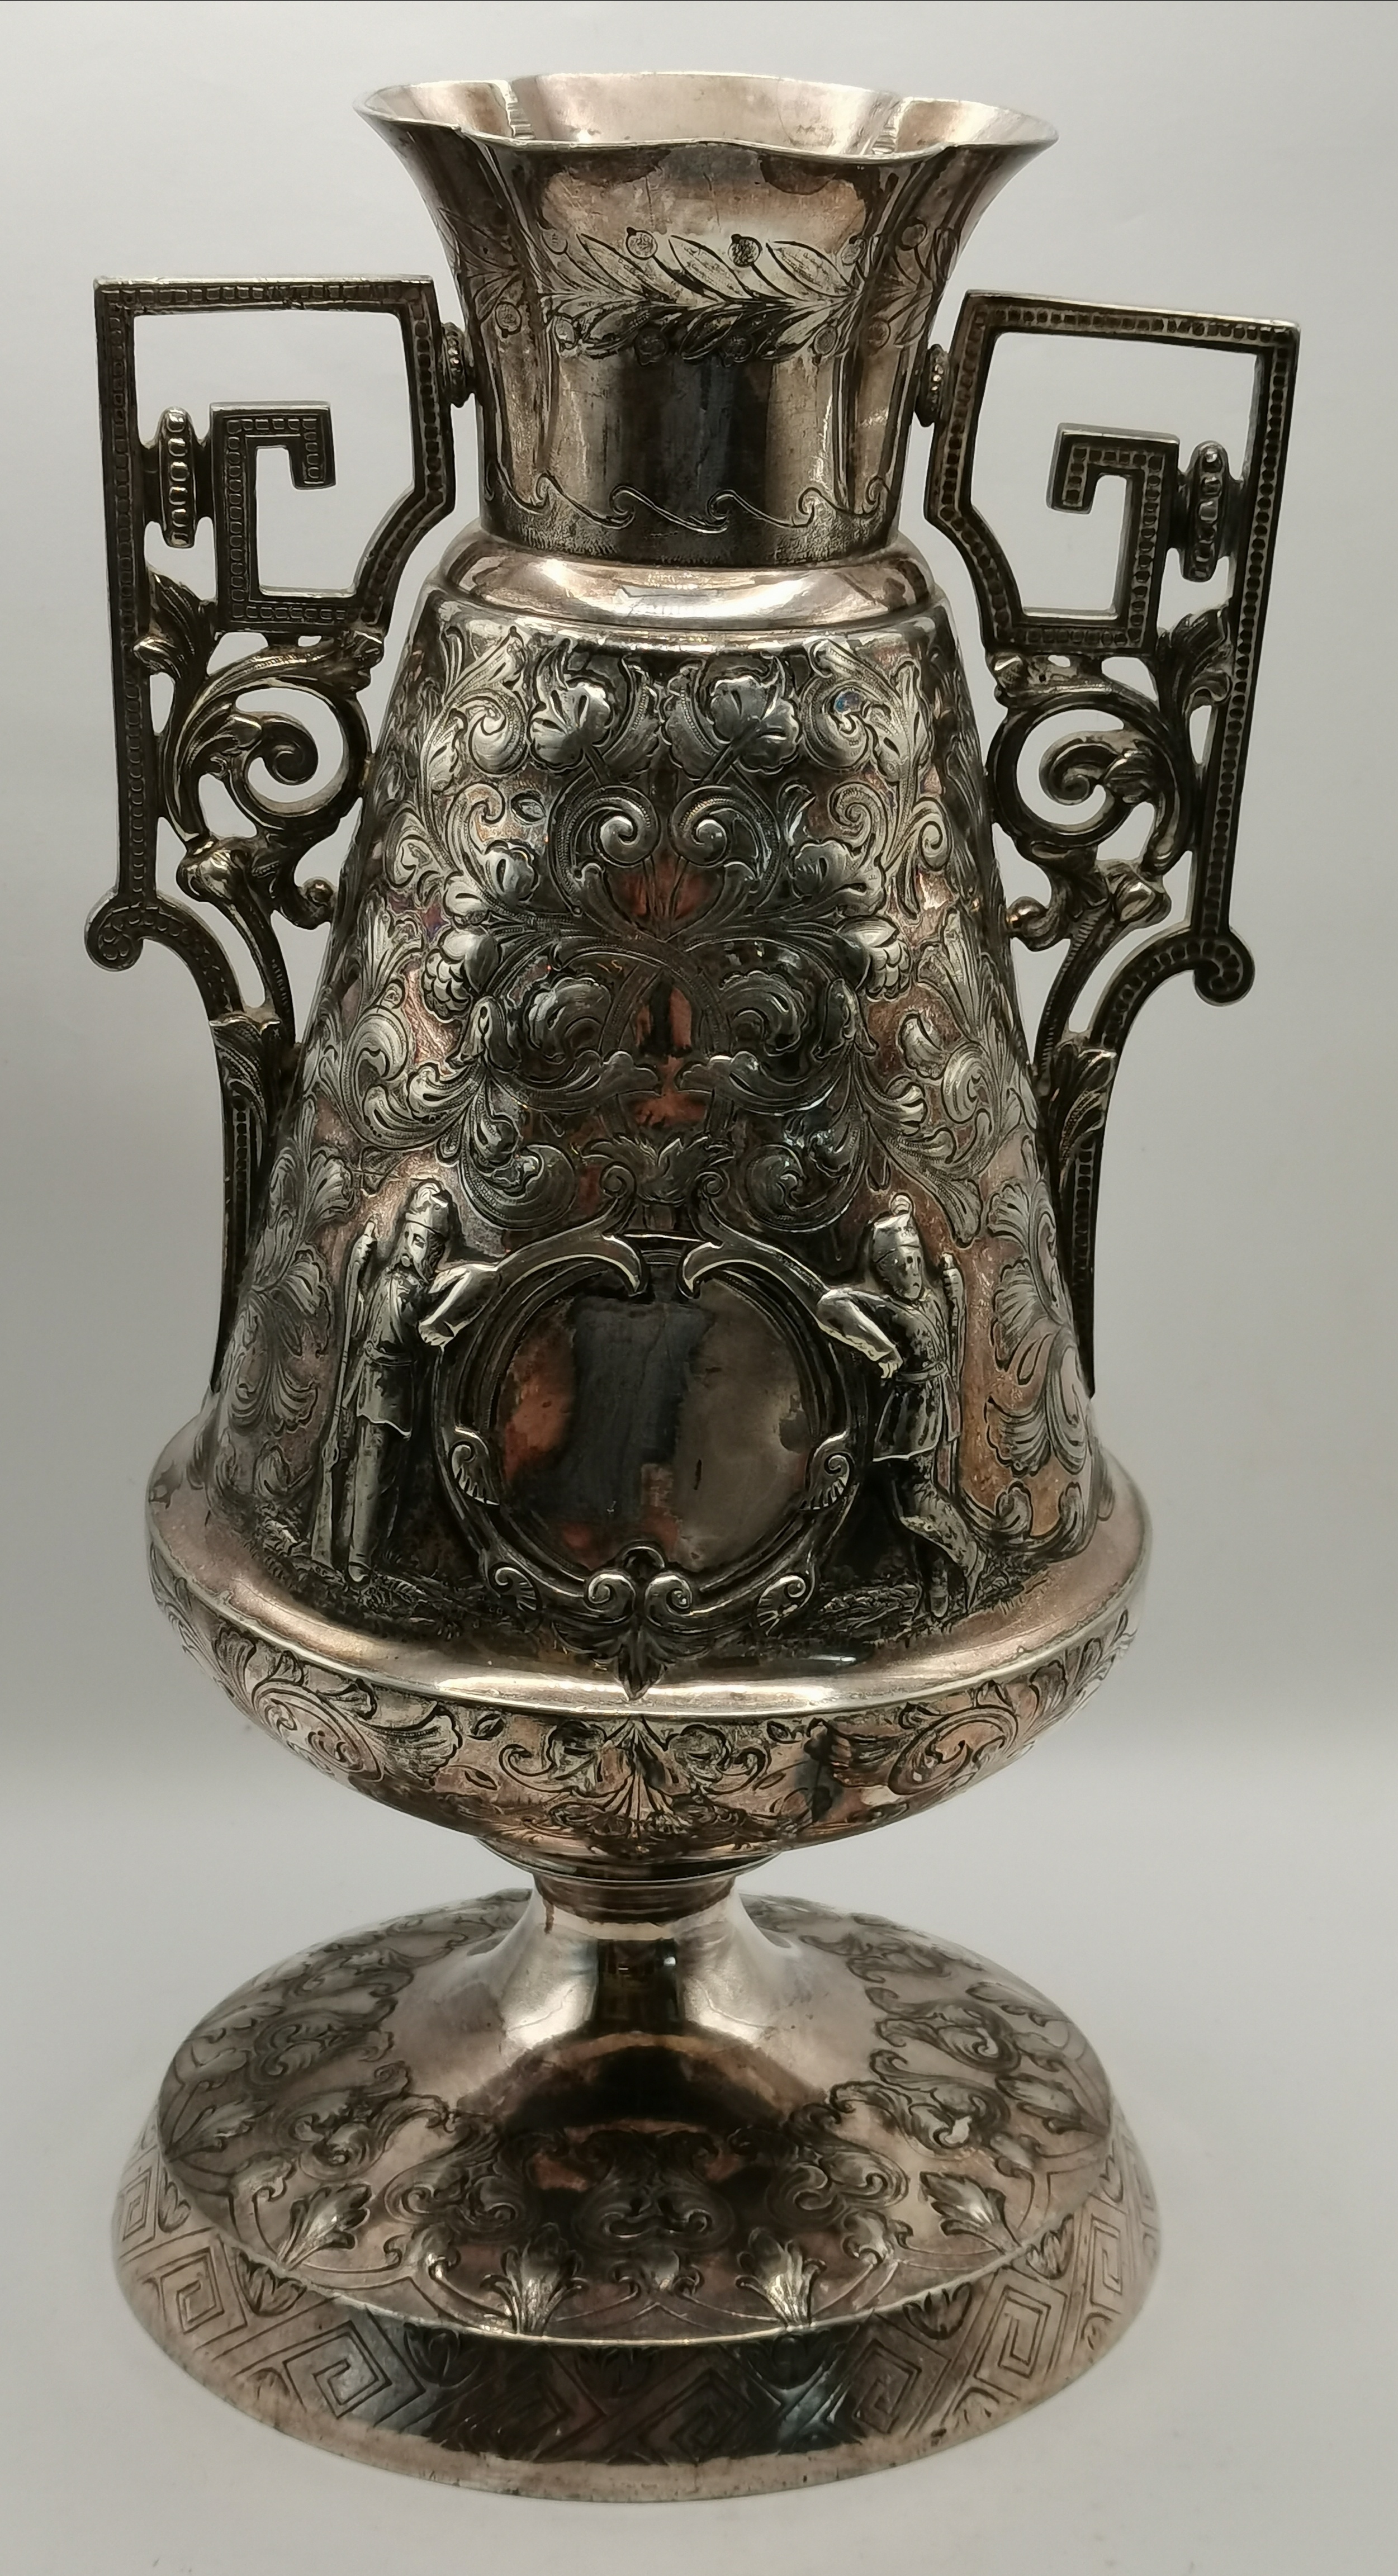 A highly decorated silvered vase 30cm high with so